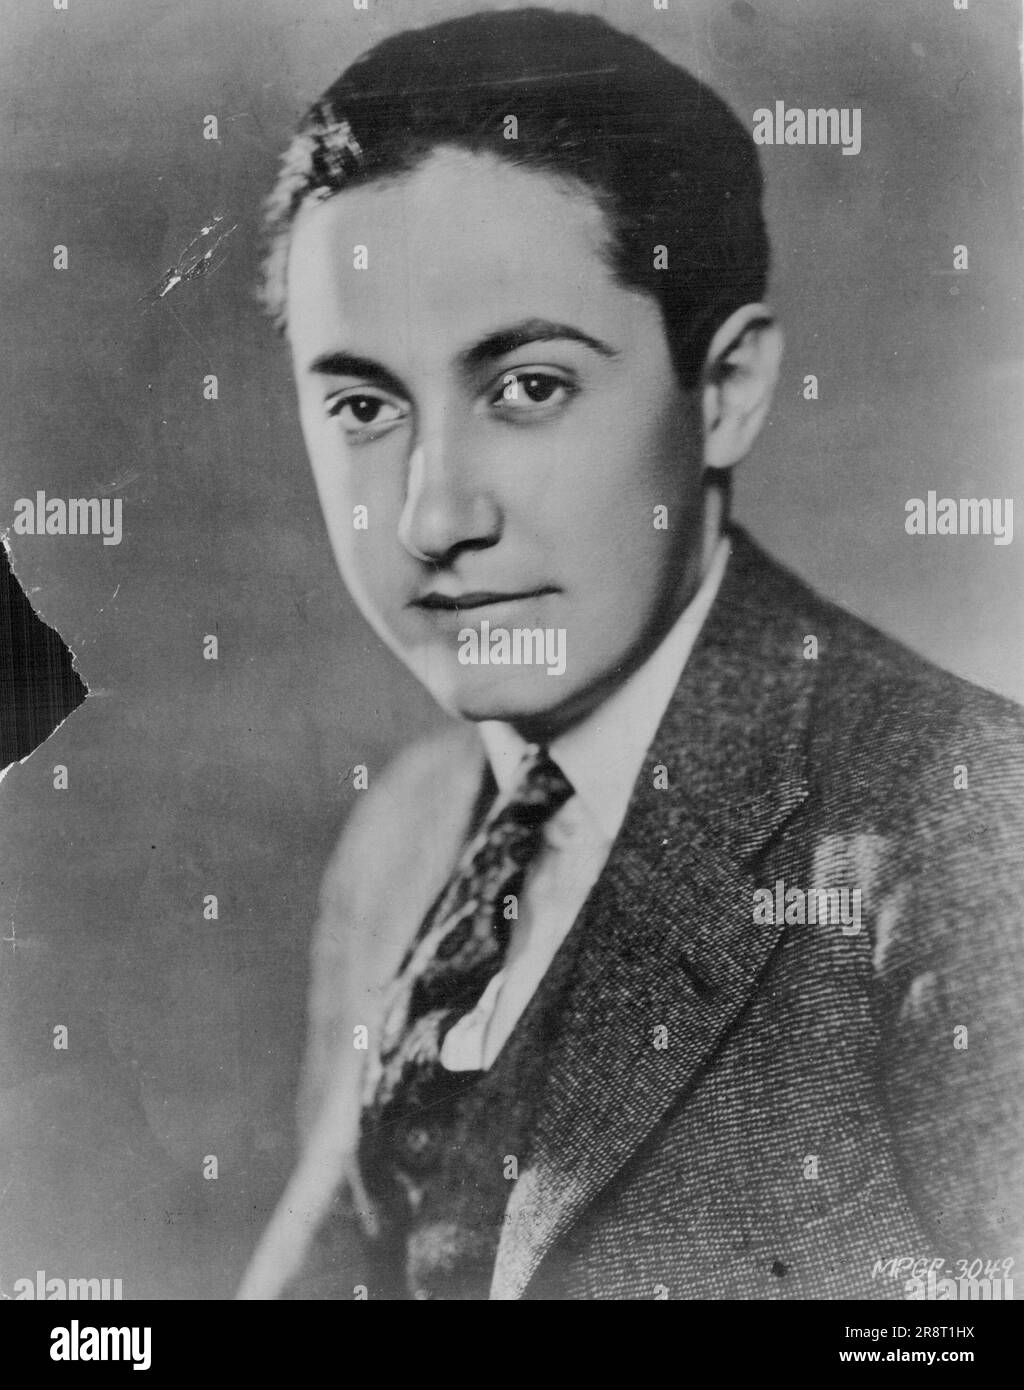 Irving Grant Thalberg the young executive genius of the Metro Goldwyn-Mayer studios. Irving Thalberg (above) who wanted to victimise Gable. August 22, 1947. Stock Photo